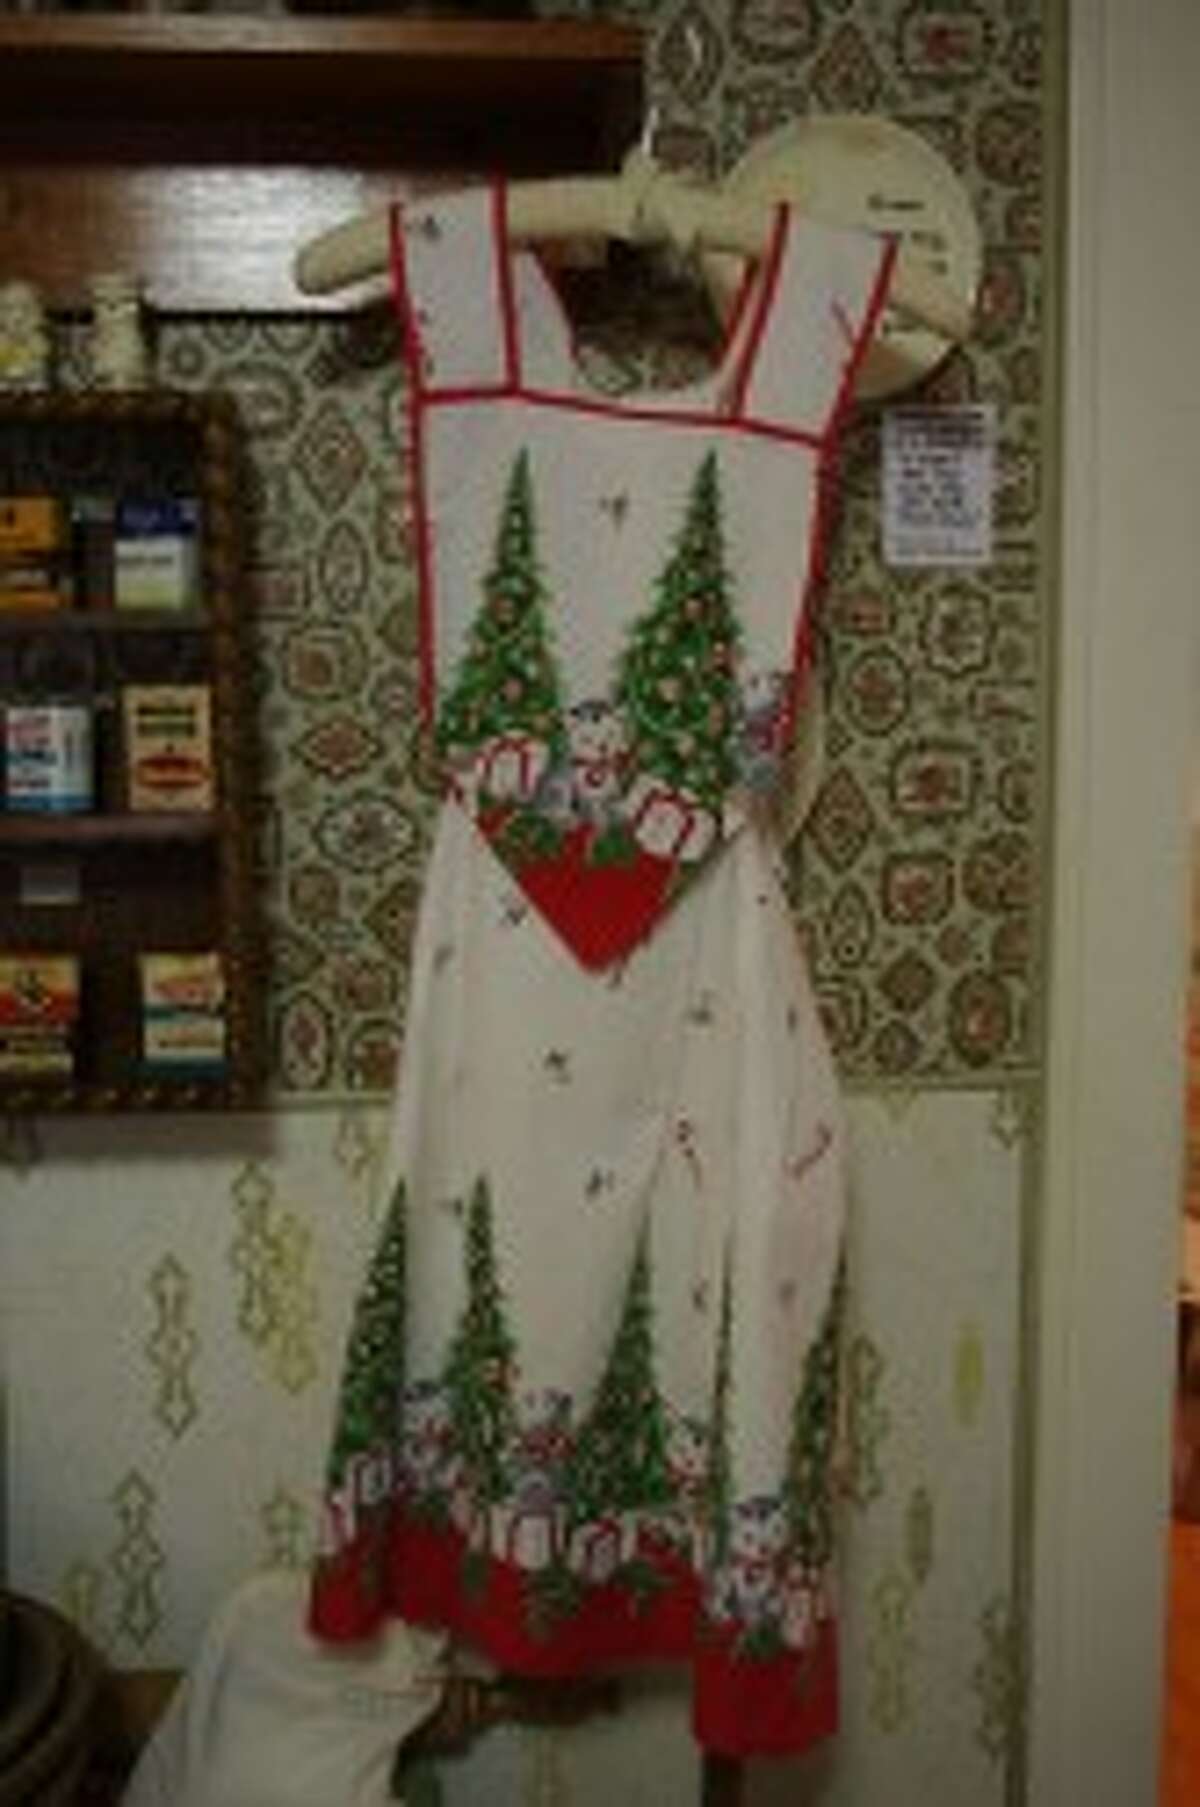 This Finnish apron and other traditional clothing is on display at the Kaleva museum. (News Advocate File Photo)